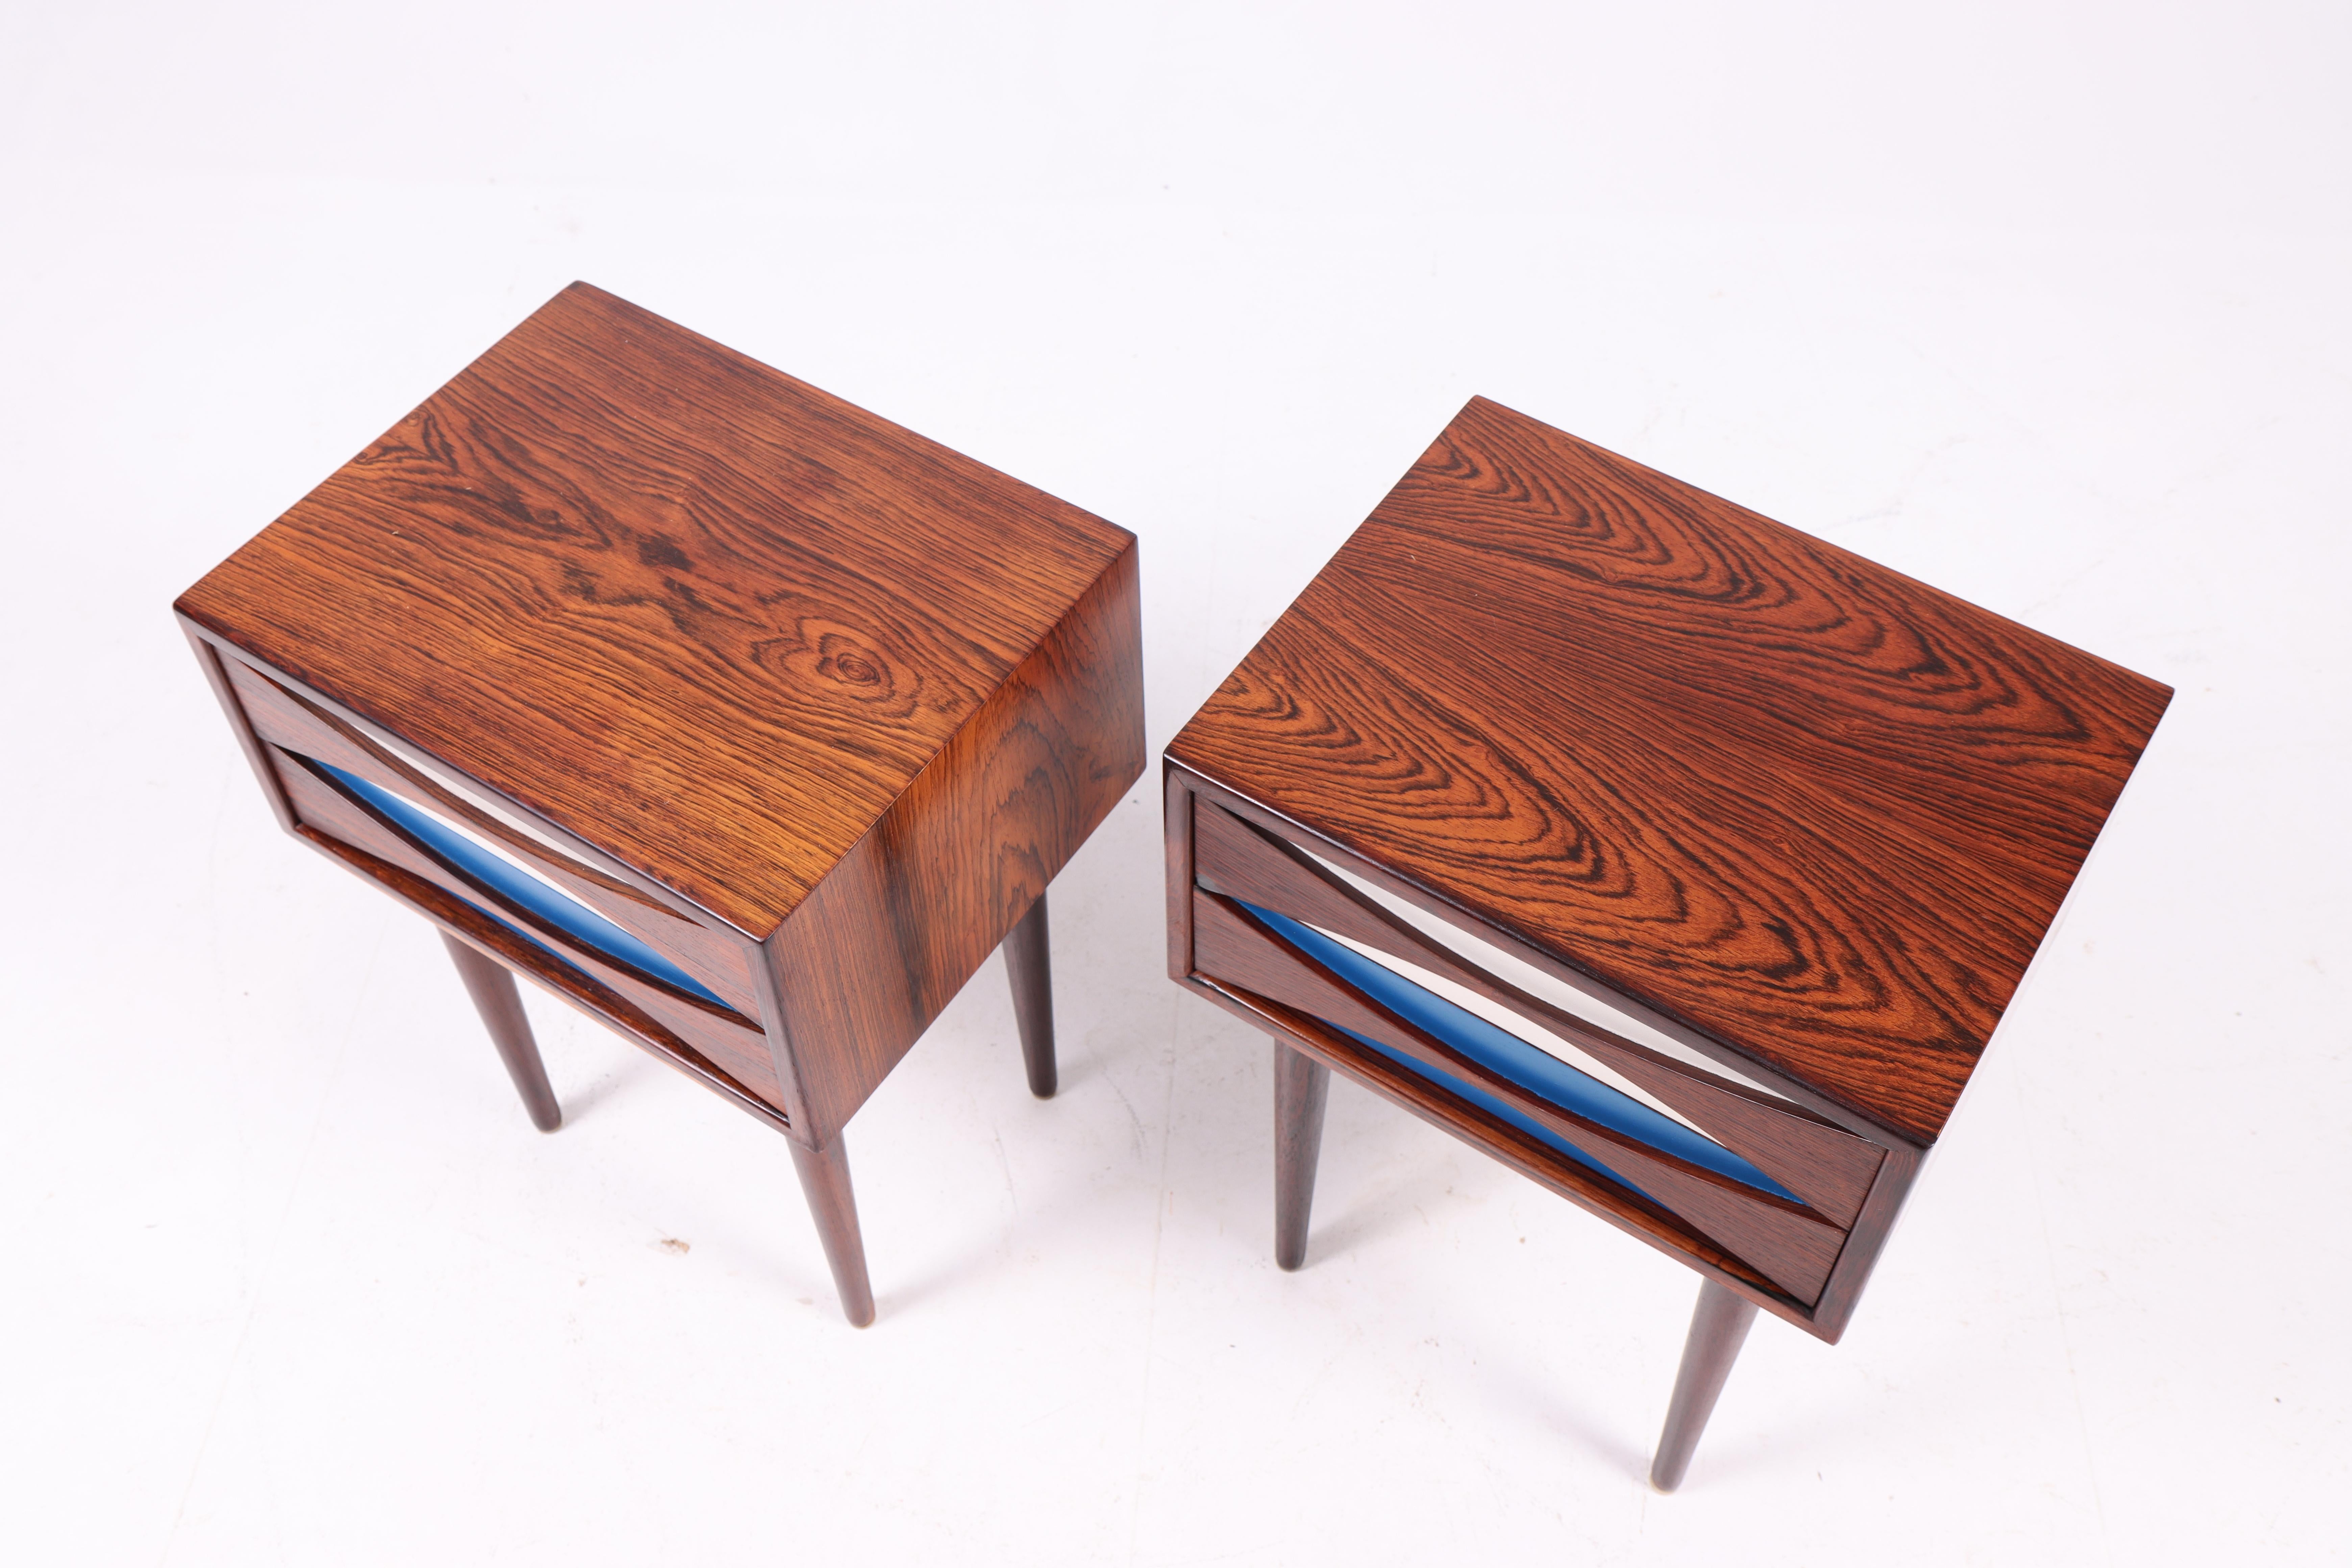 Pair of Rare Midcentury Nightstands in Rosewood by Niels Clausen, 1960s In Good Condition For Sale In Lejre, DK